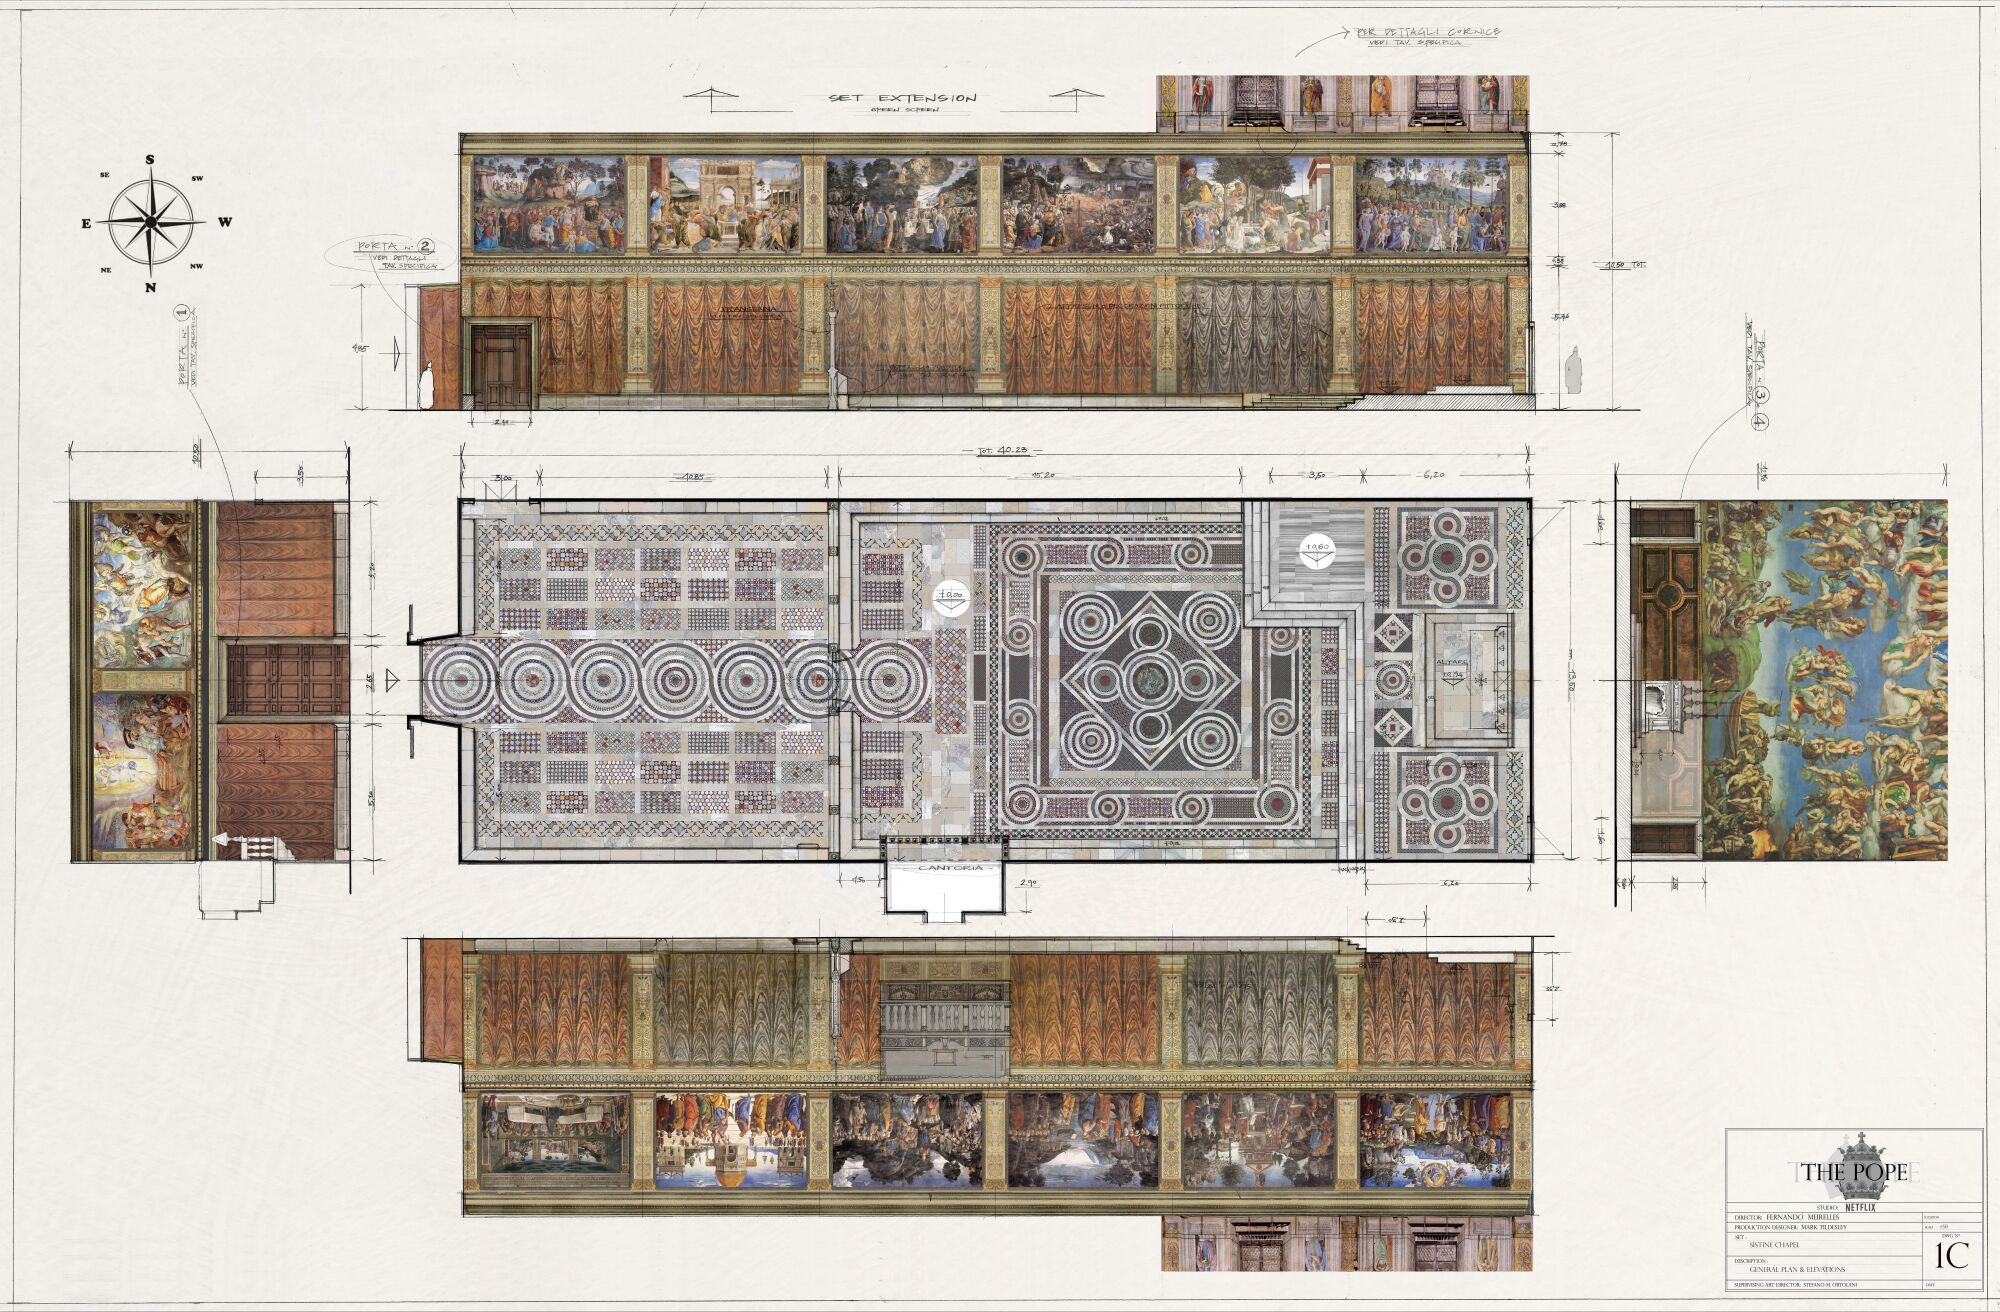 A detailed blueprint of the film's Sistine Chapel, including Michelangelo's masterful frescoes.